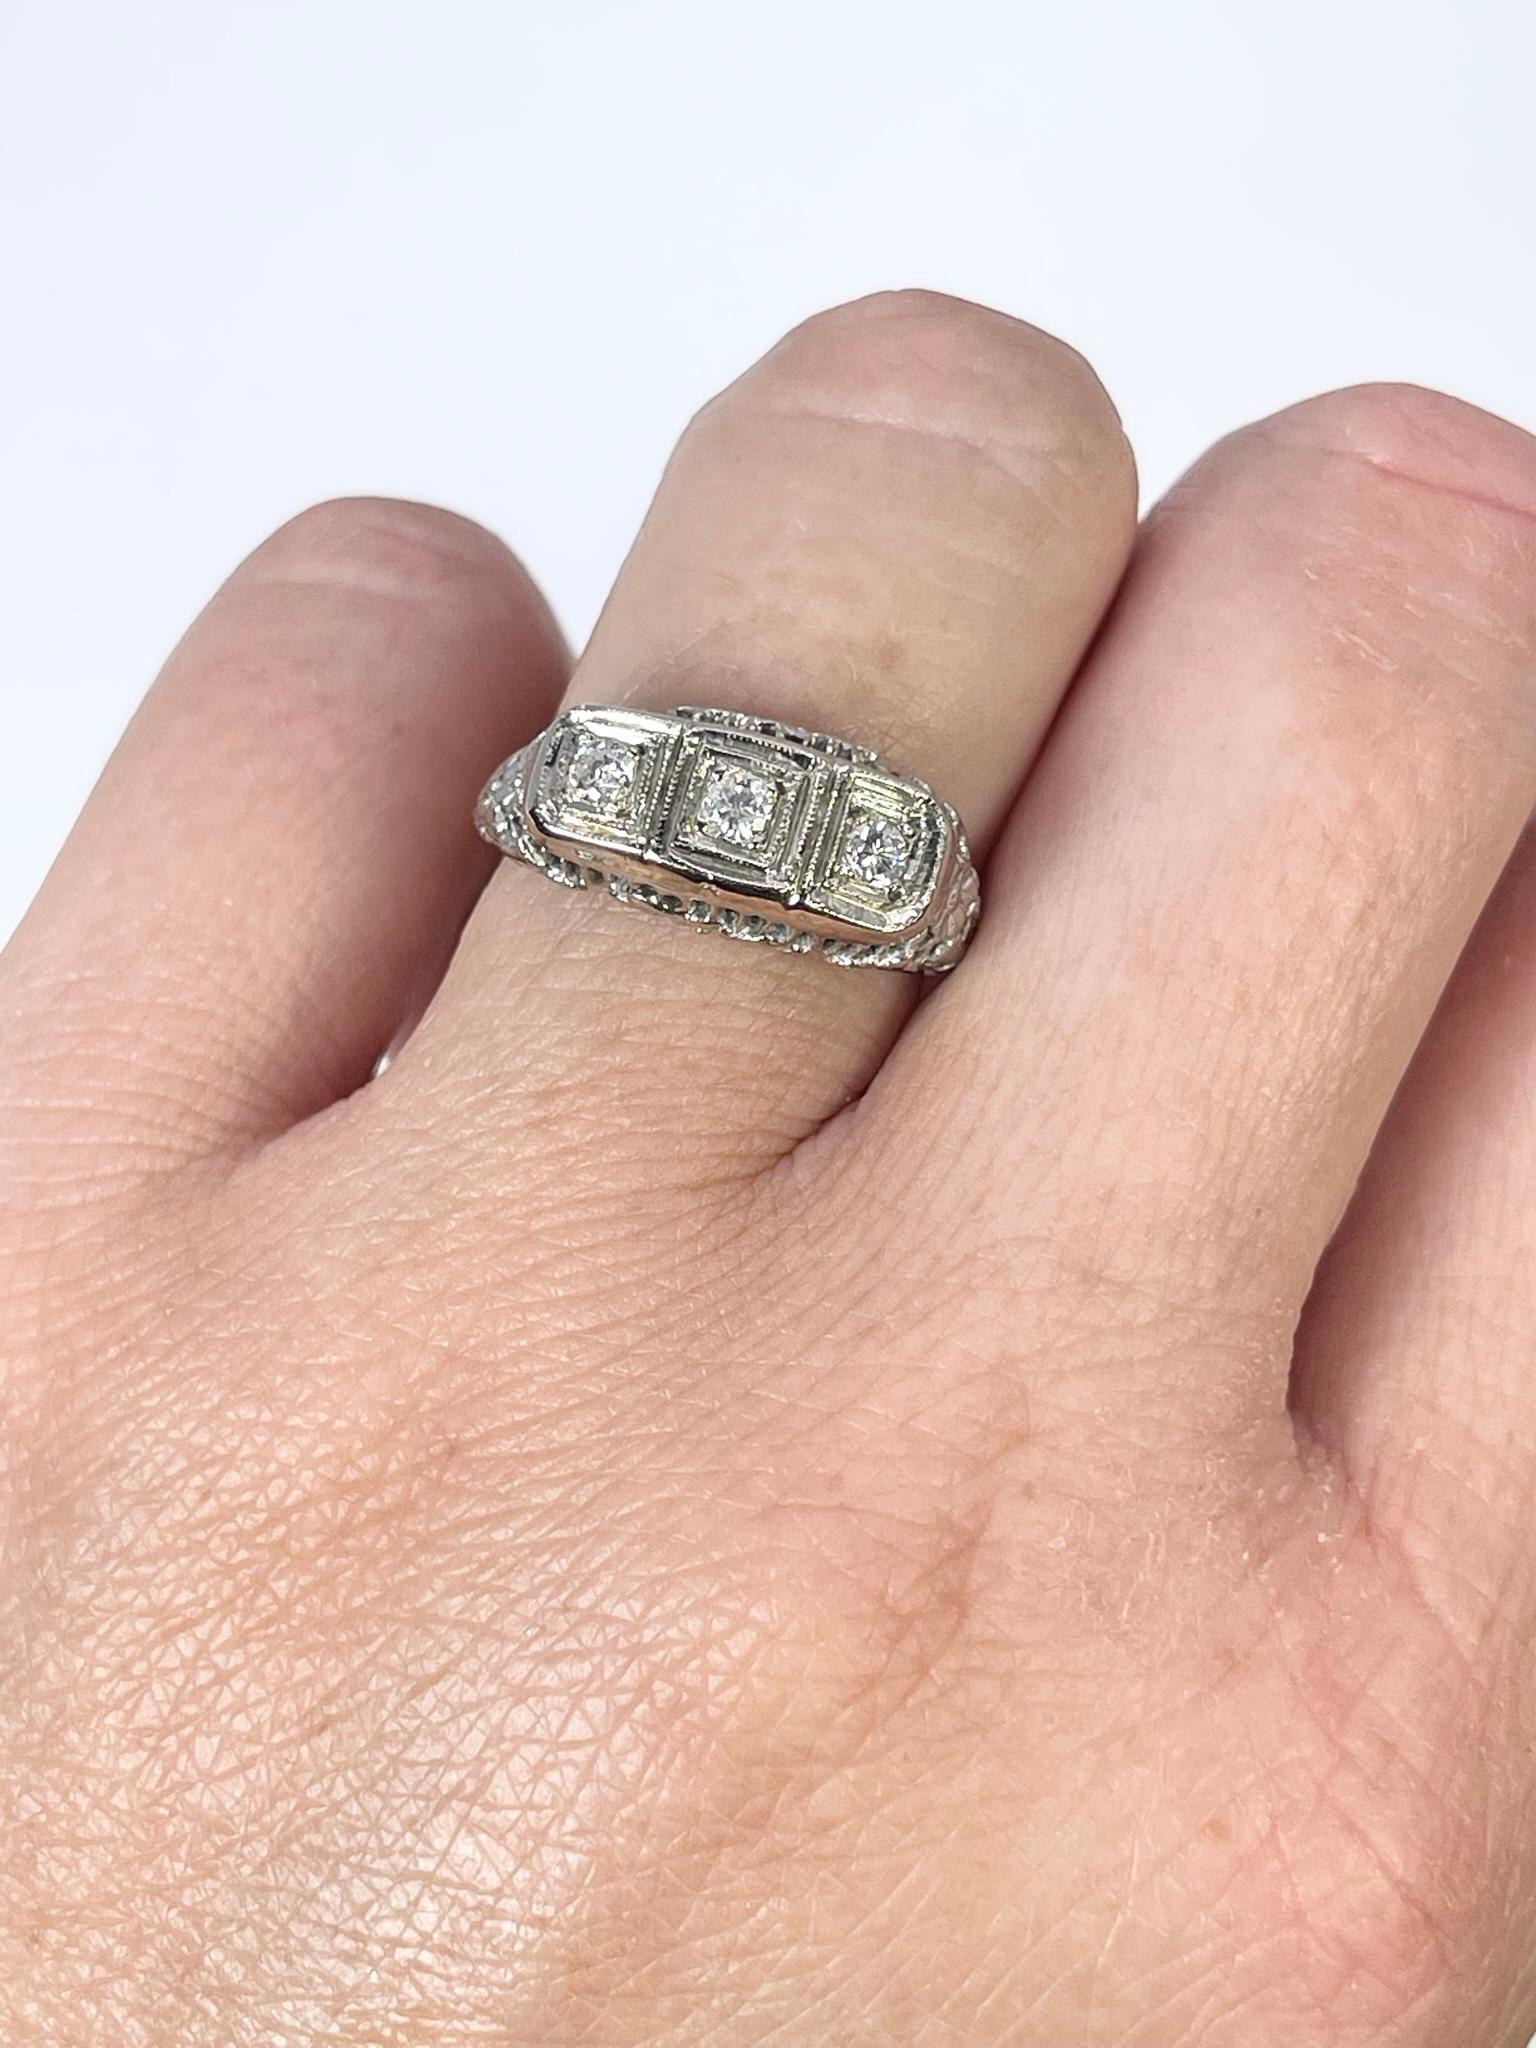 Vintage Three Stone Diamond Ring 14kt White Gold Old Diamonds Antique In Good Condition For Sale In Jupiter, FL